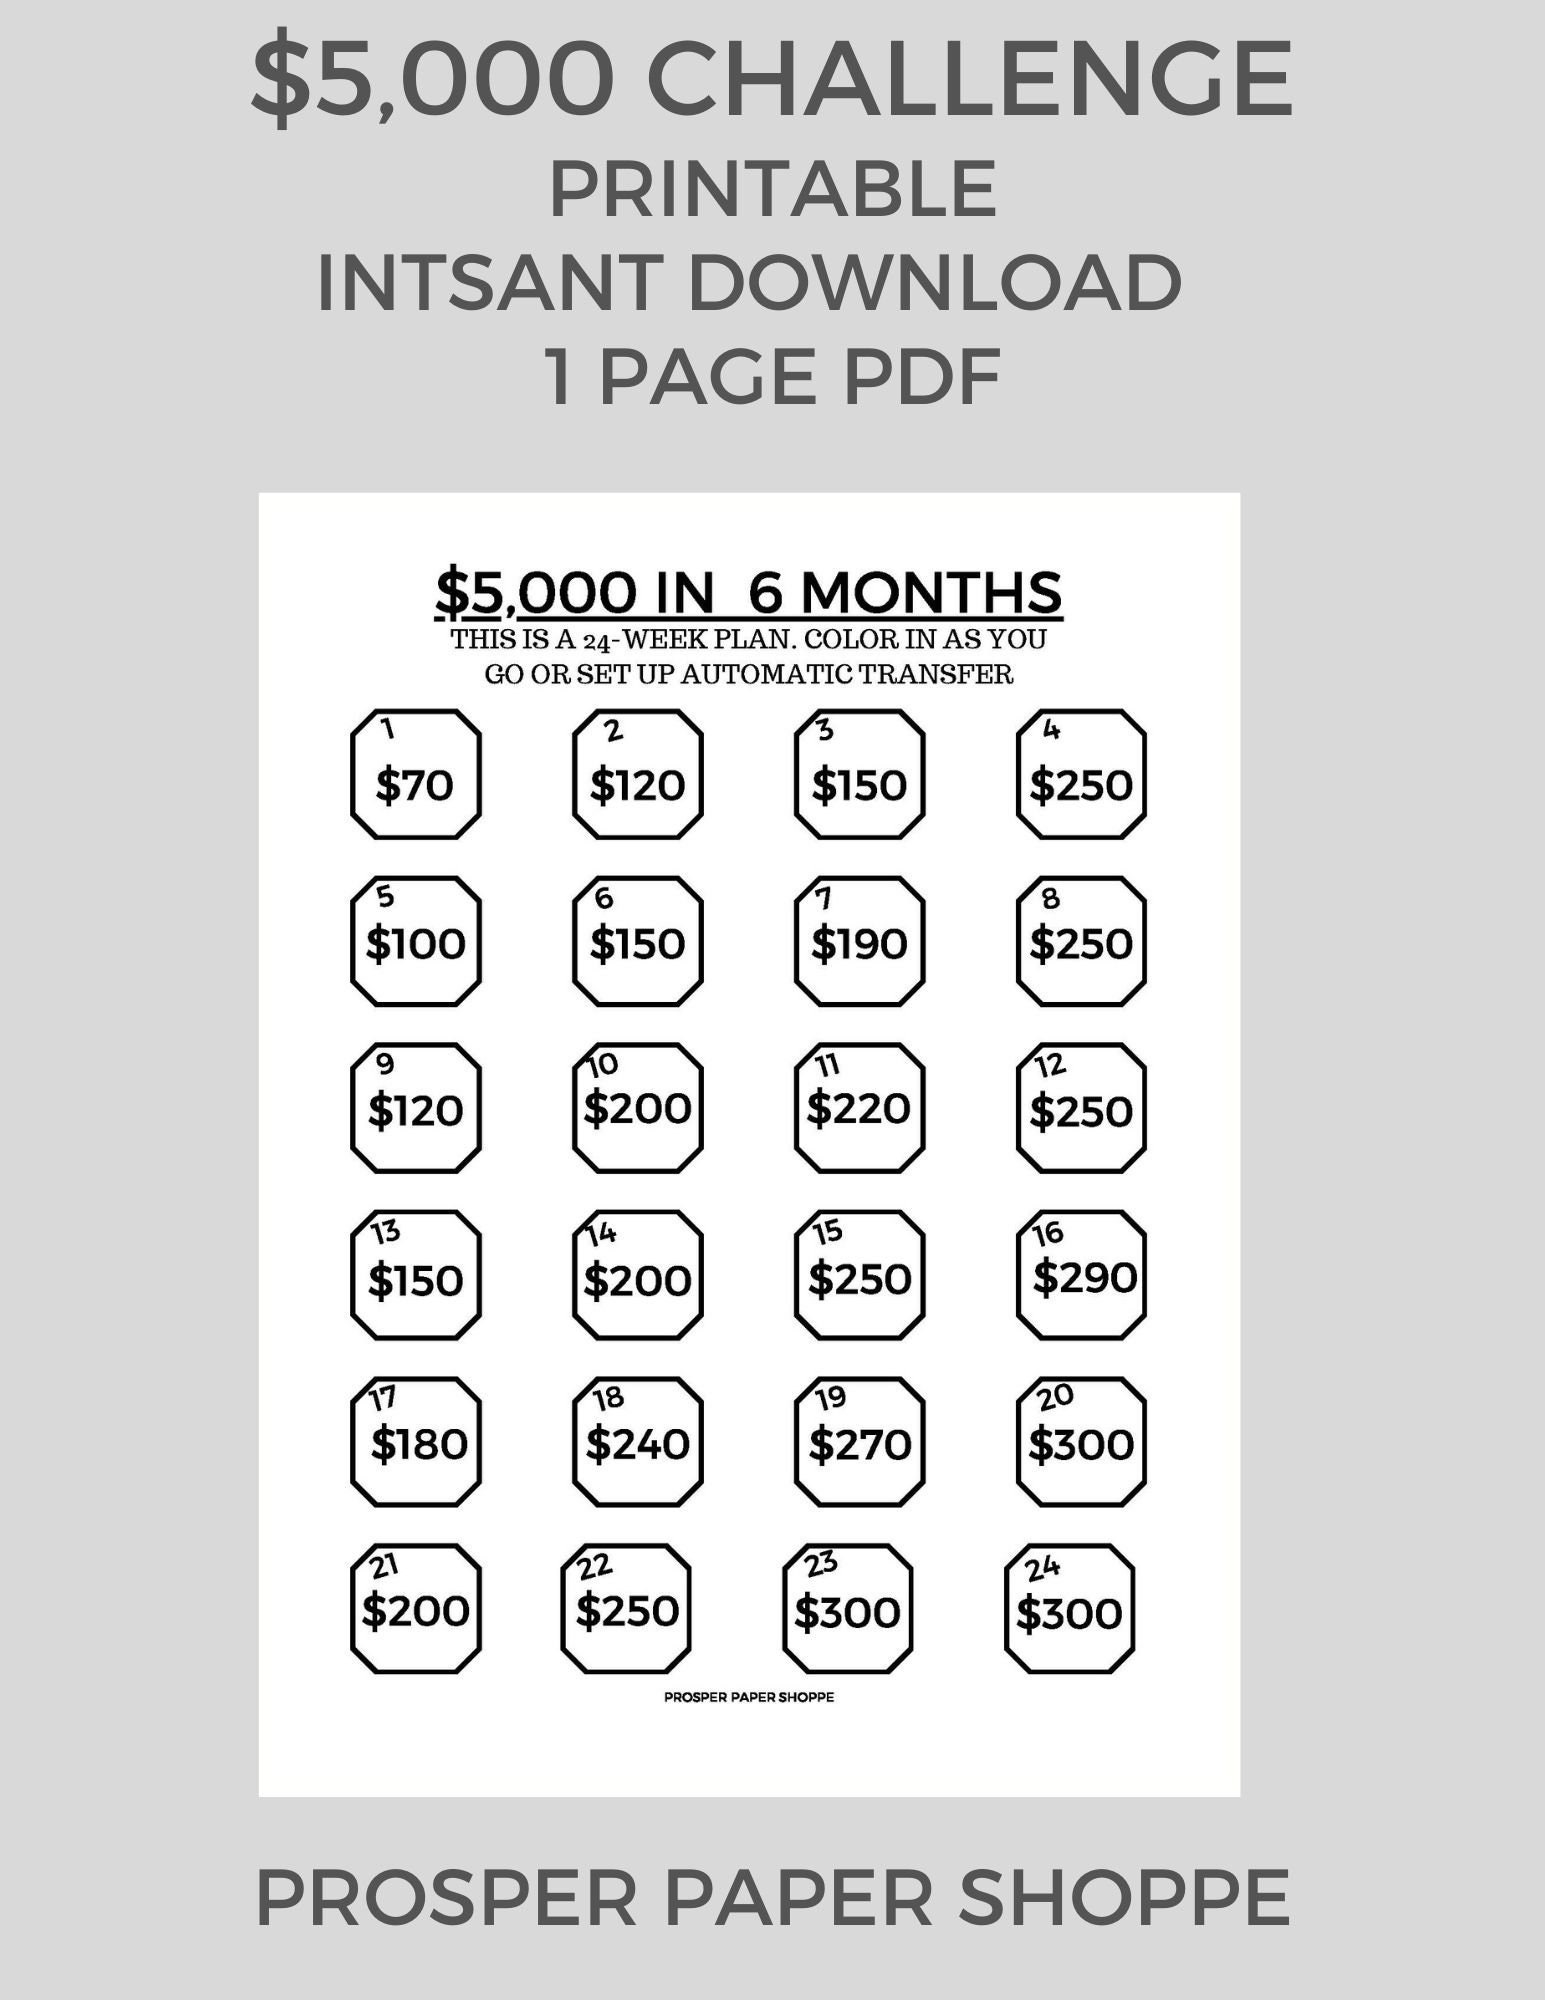 5000 In 6 Months Savings Challenge Pdf Instant Download - Etsy